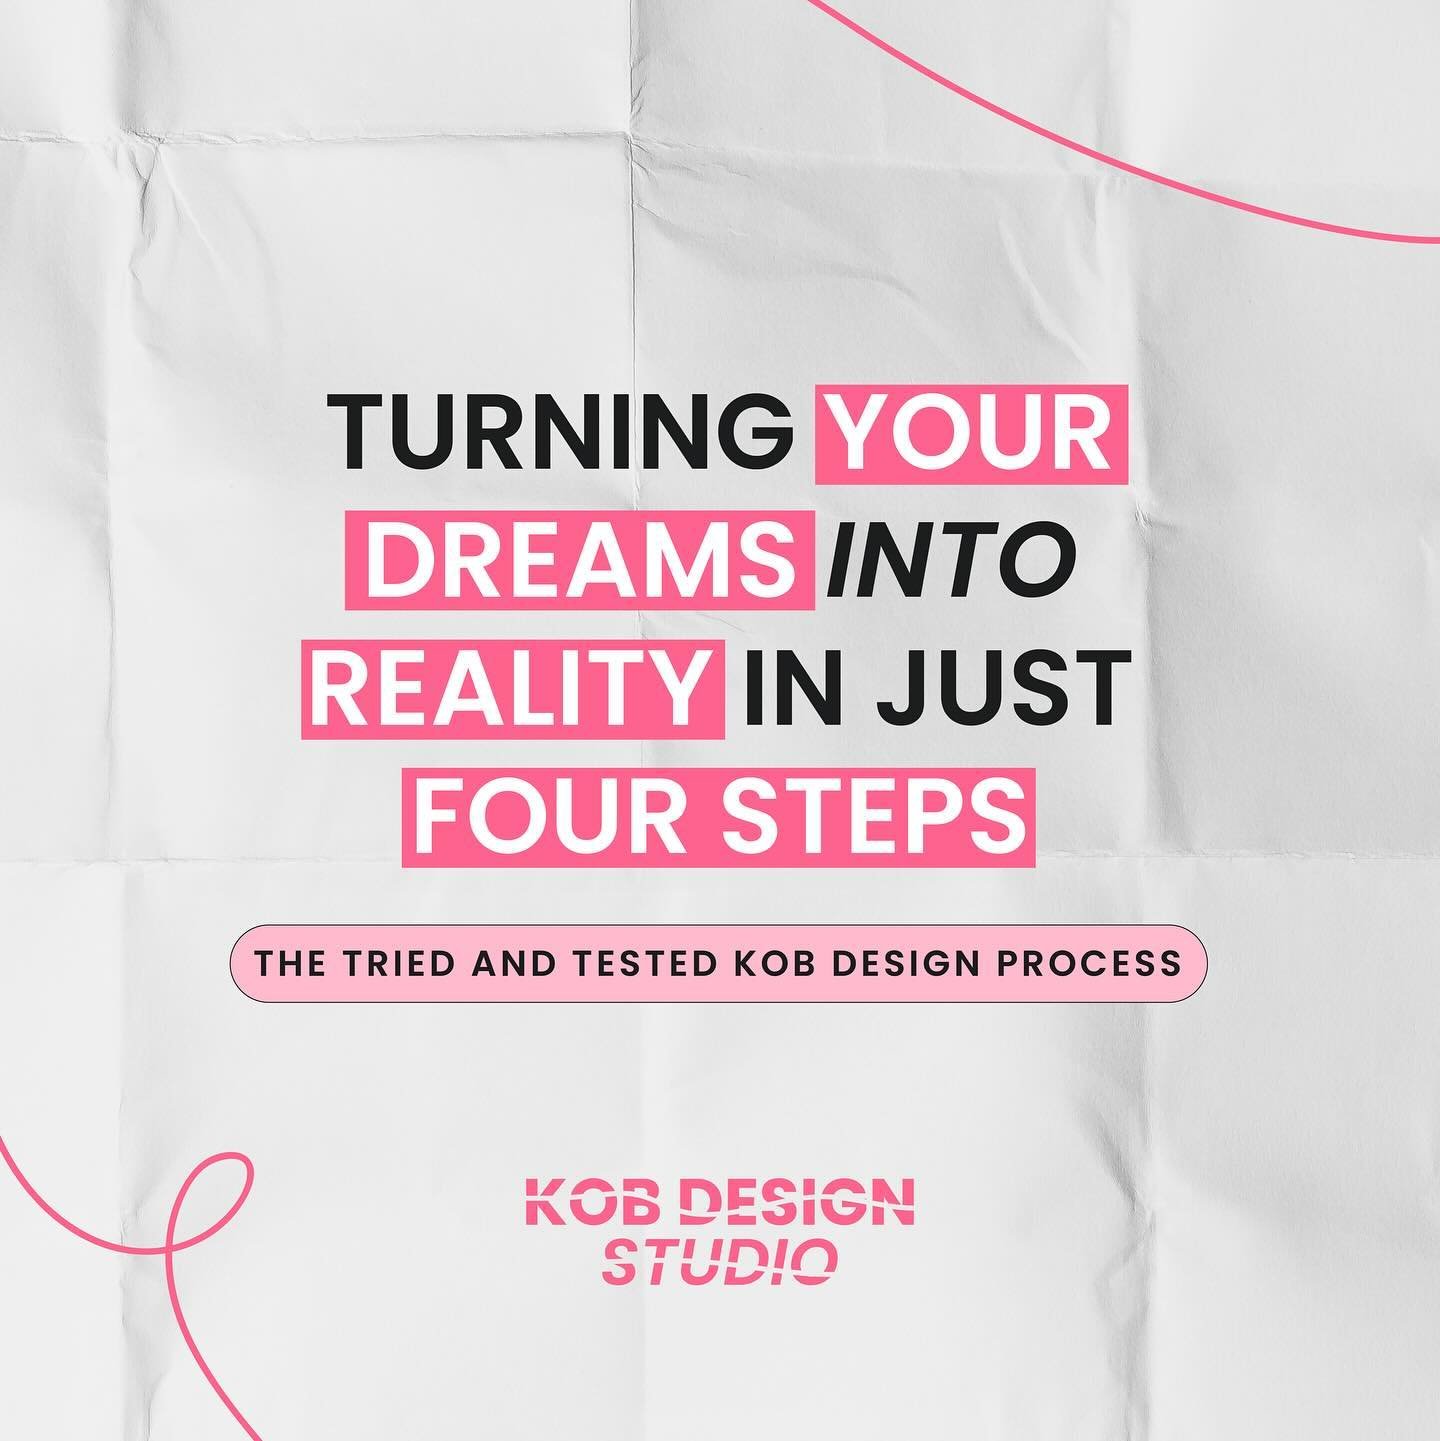 Today I&rsquo;m going to let you in on how a brand project goes down at KOB Design UK! 

Of course every project is unique, so the process may change slightly depending on client preferences, time zones and everything else. 

But here is a glimpse in